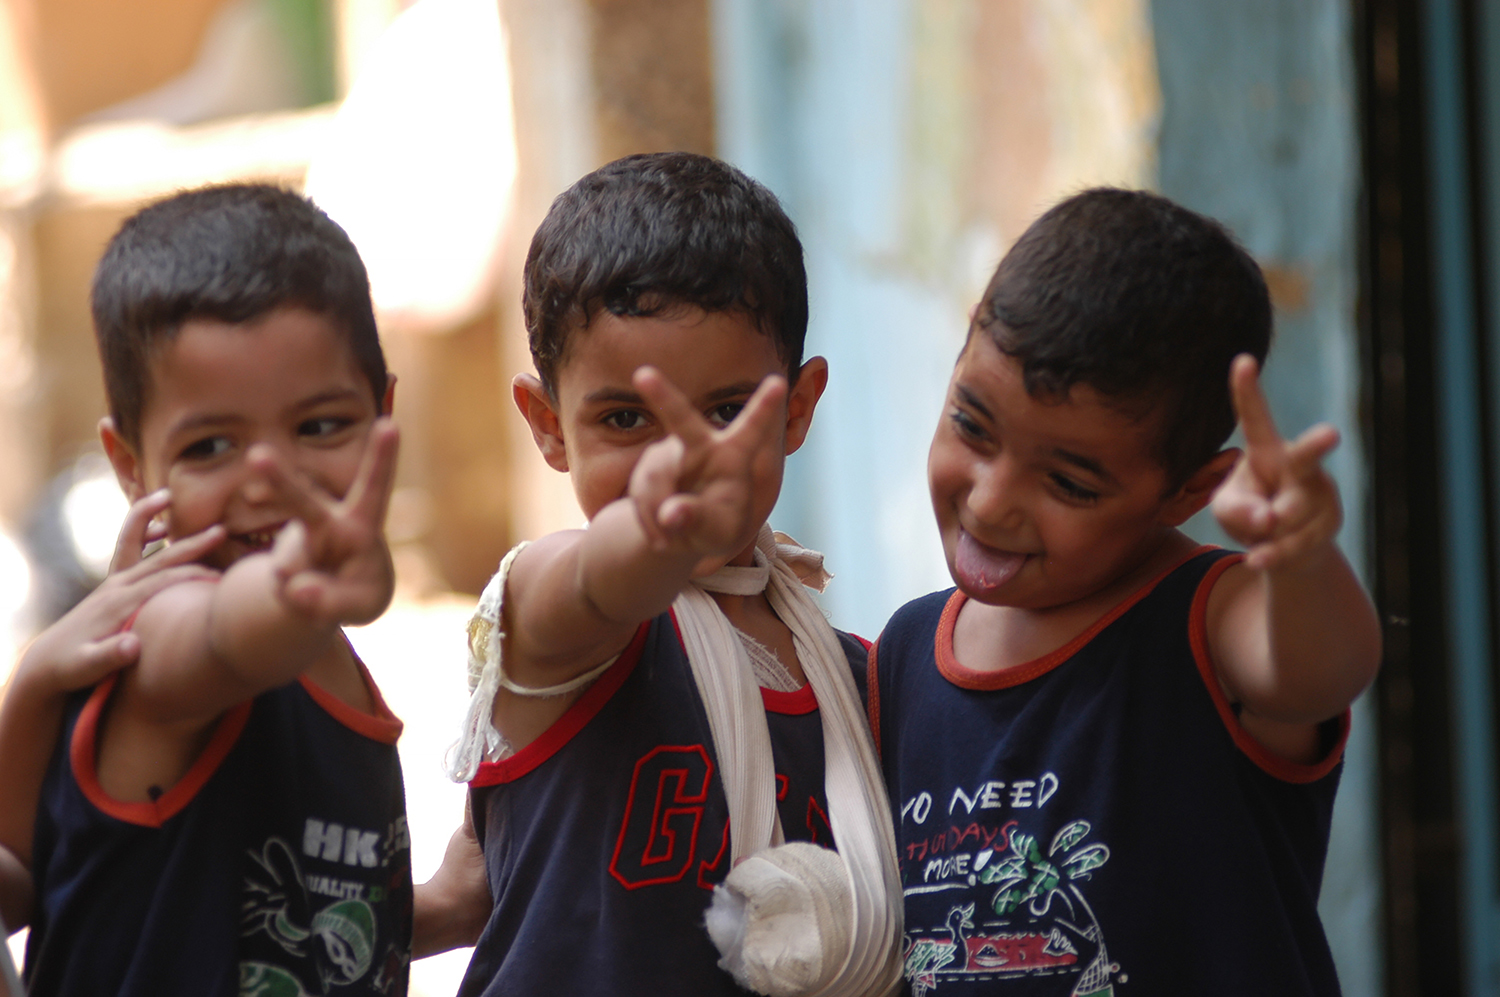 Smiling refugee boys hold hand peace signs.